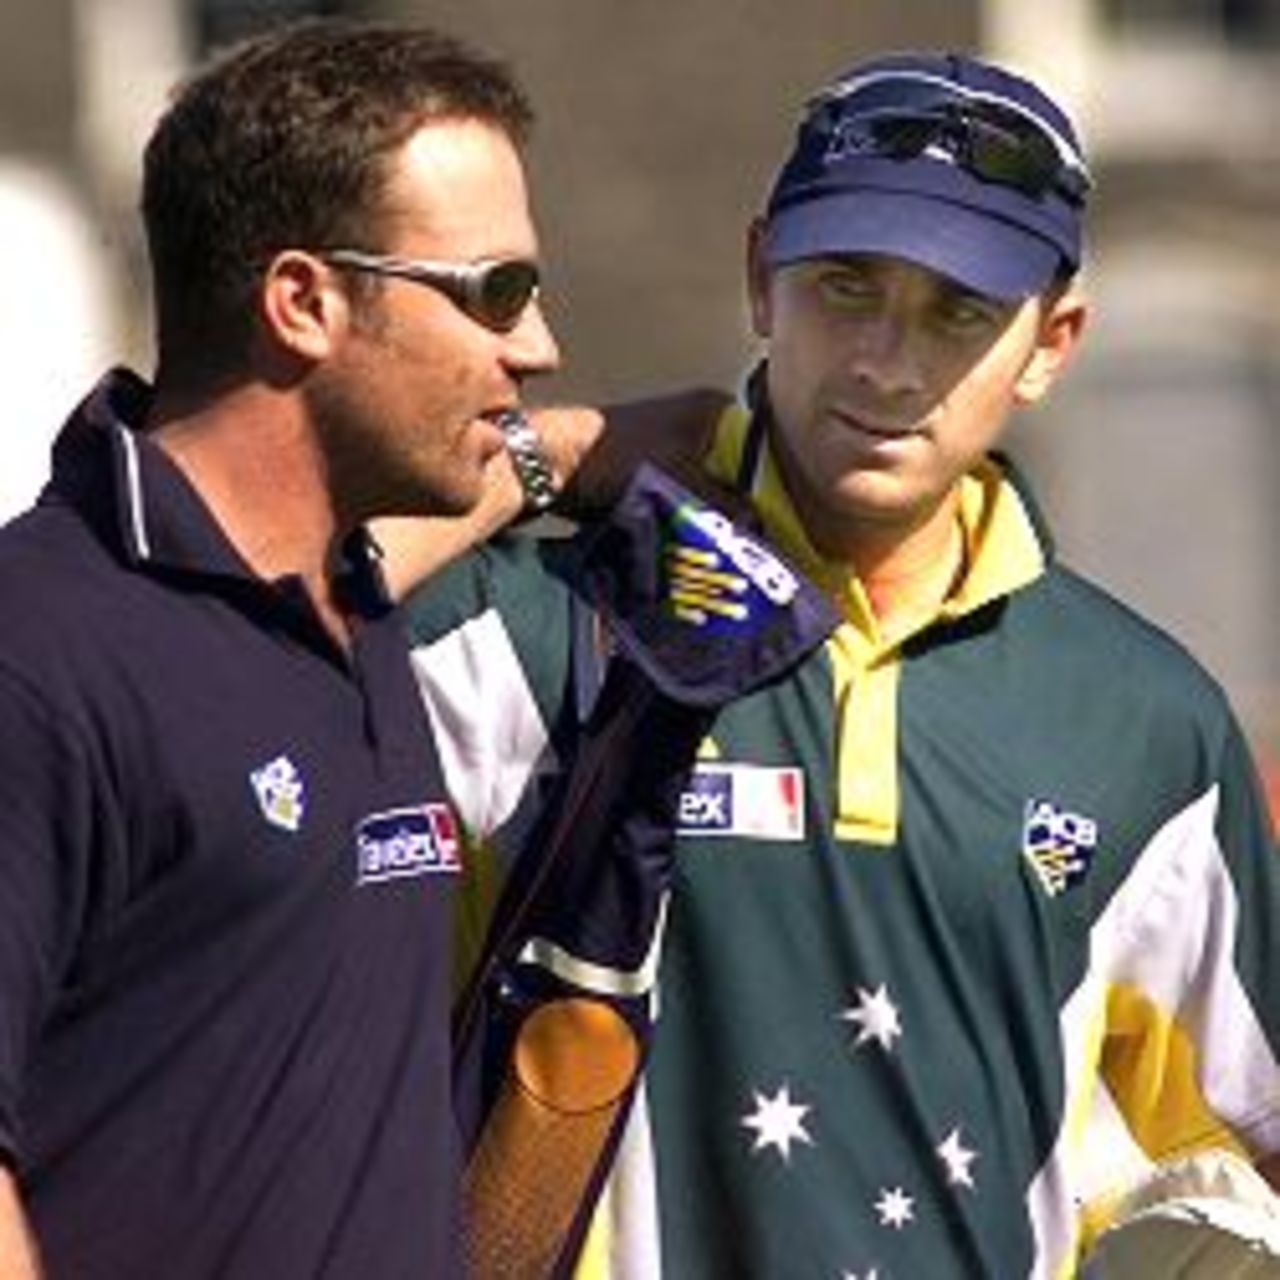 Michael Slater of Australia speaks with Justin Langer, during training at The Oval, London, England.